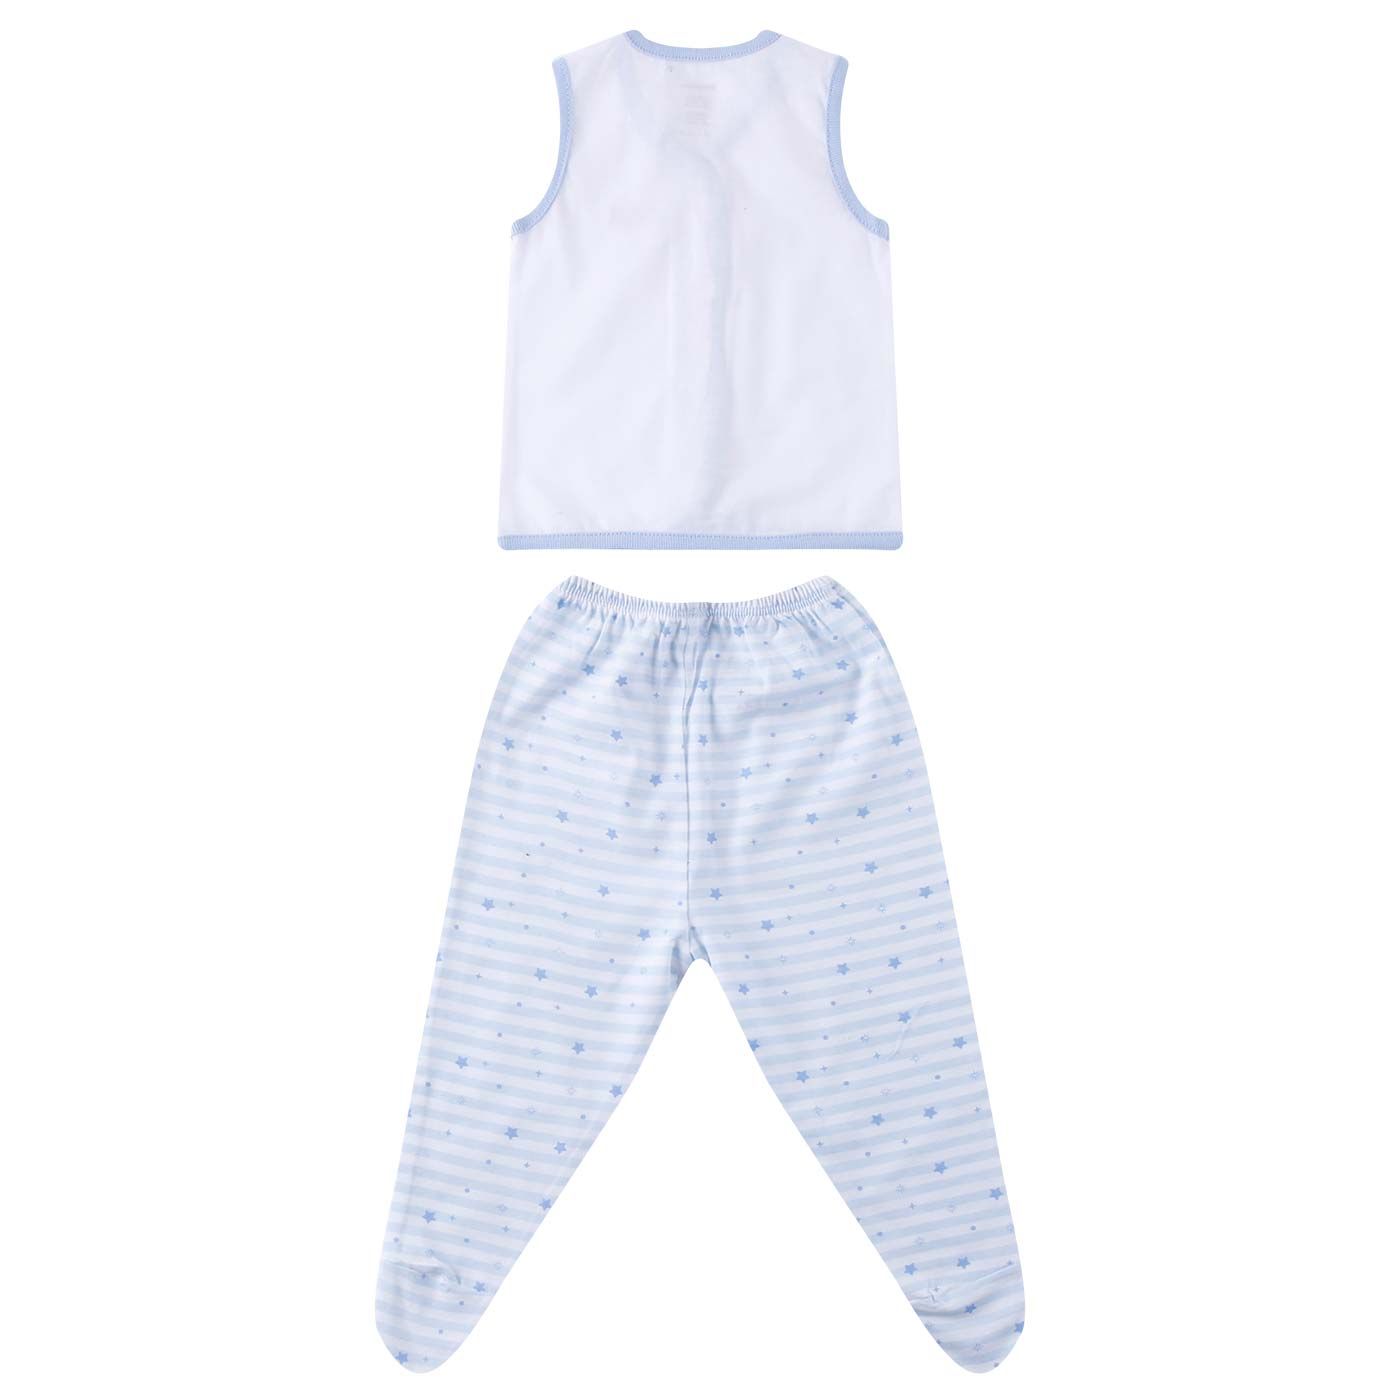 Boogybaby Sleeveless&Closed Trousers Girl-NB Stadust (Isi 3) - 5